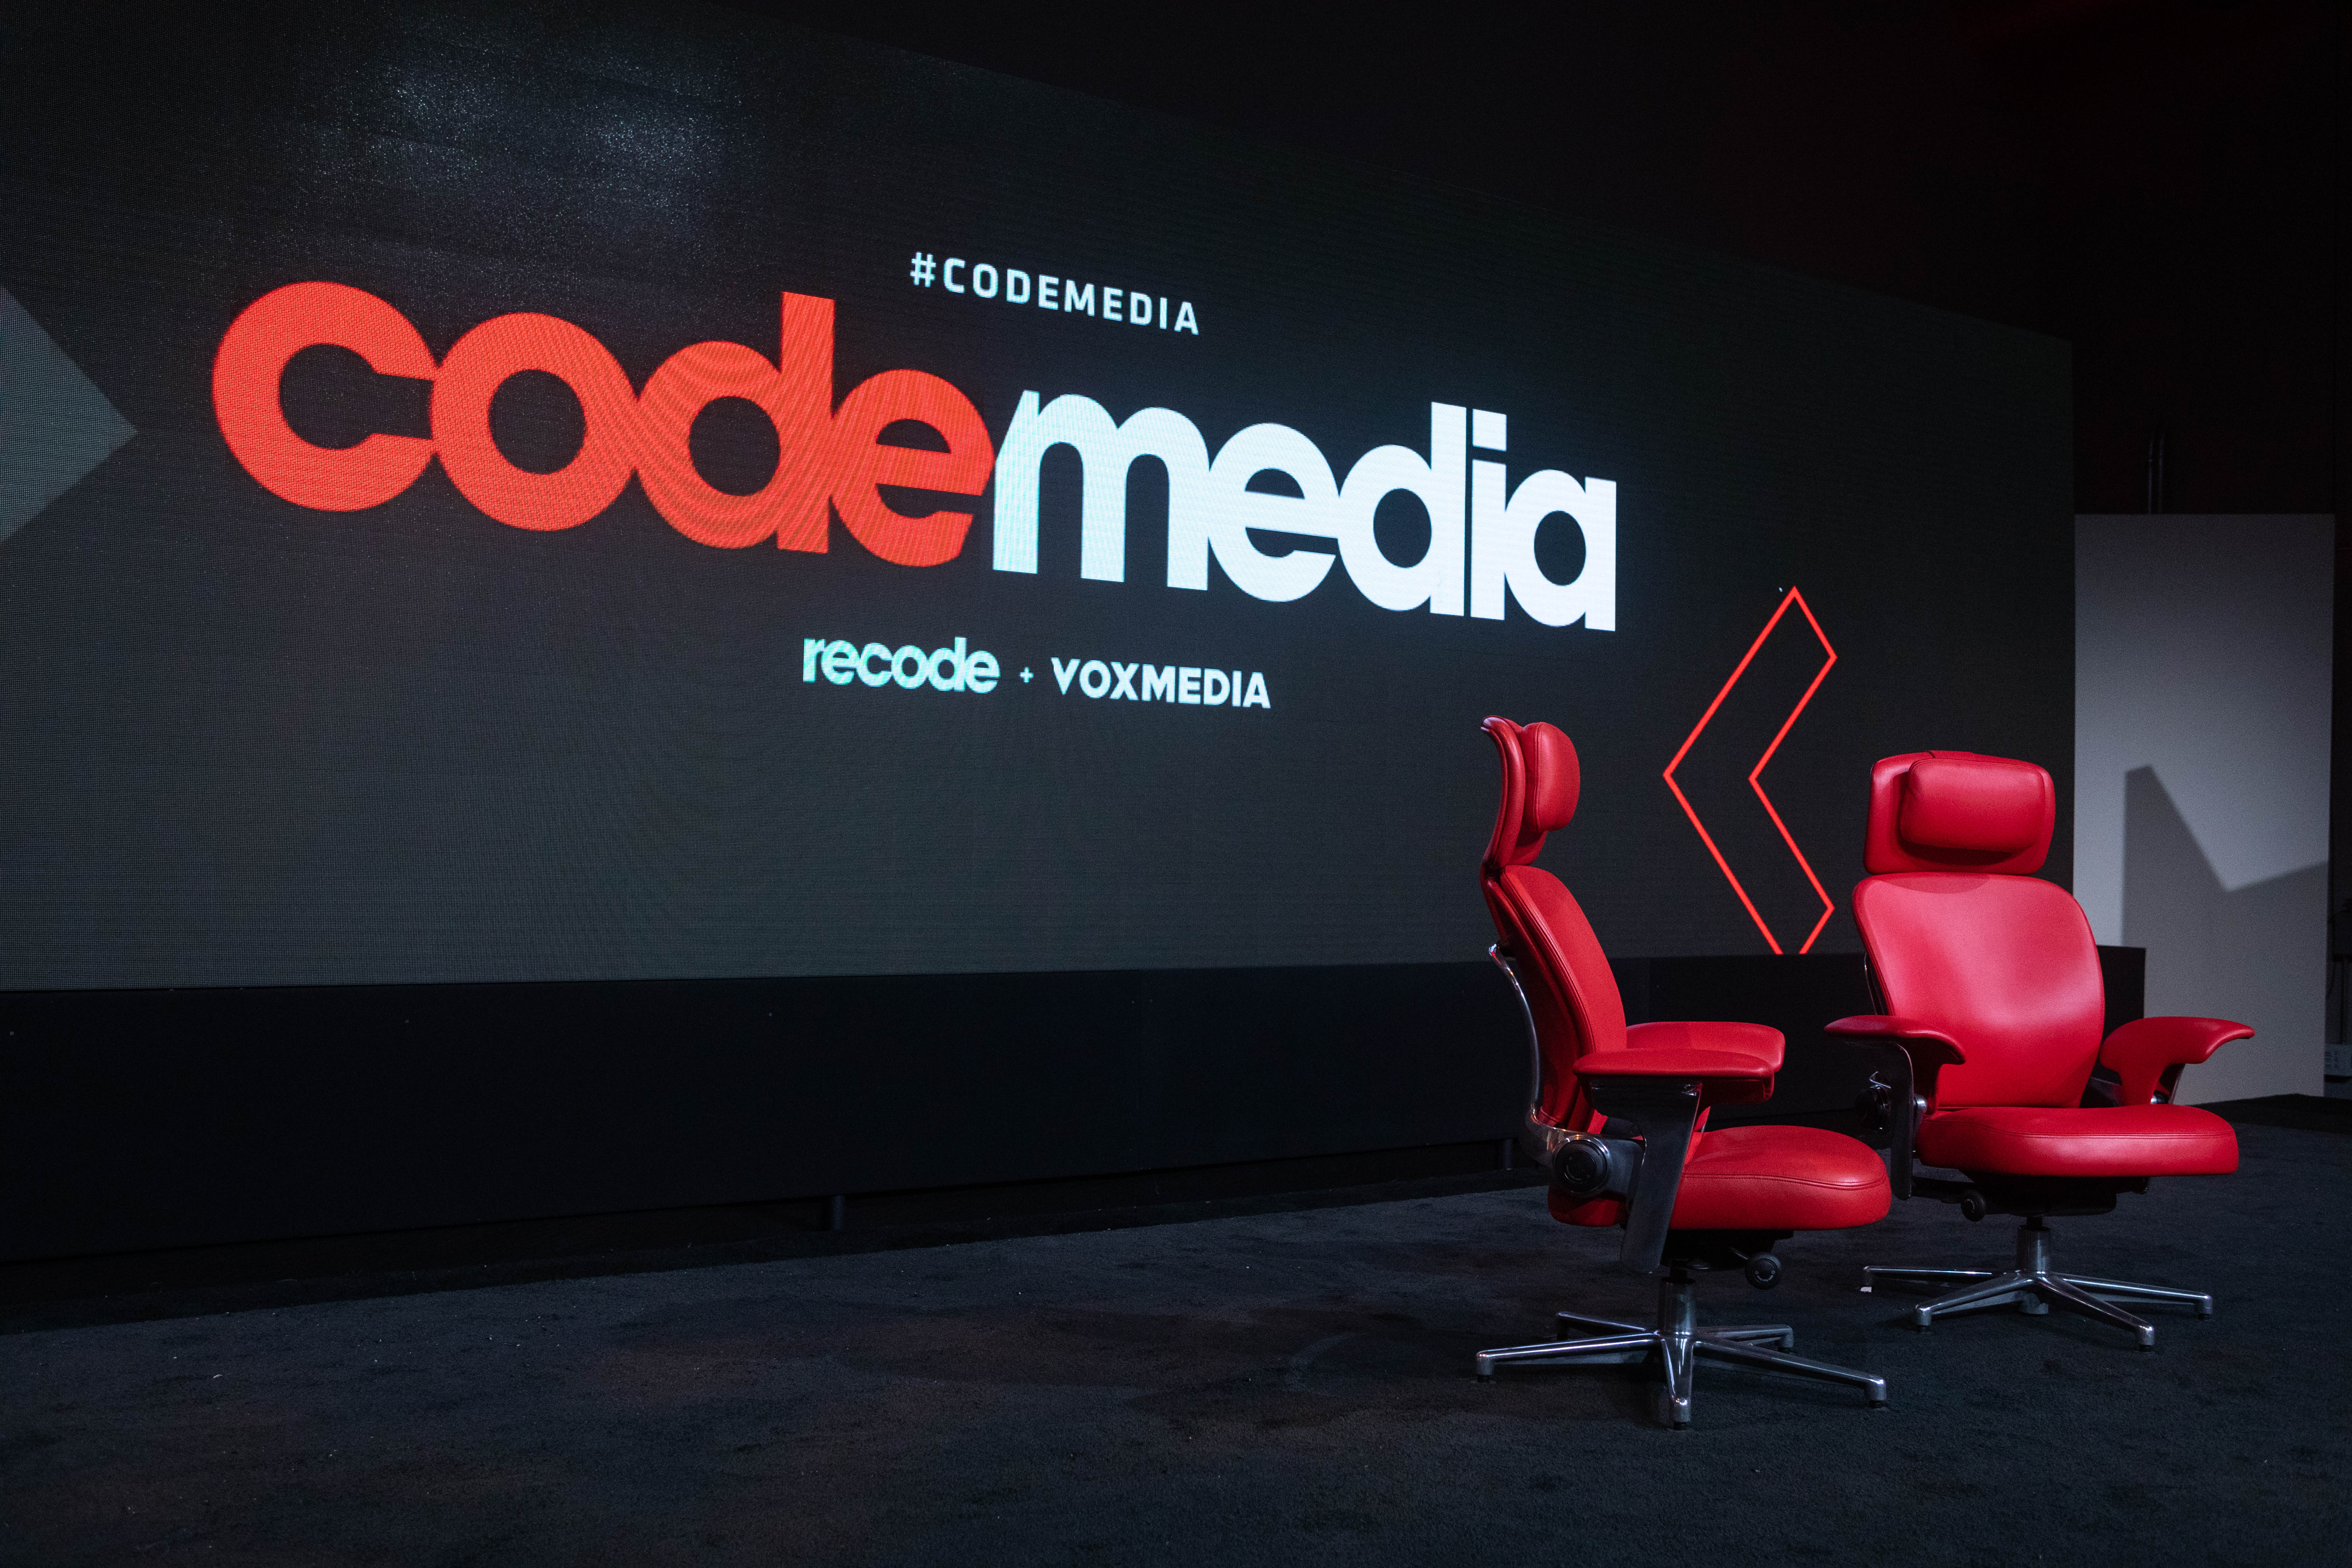 The red chairs on the Code Media 2019 stage.